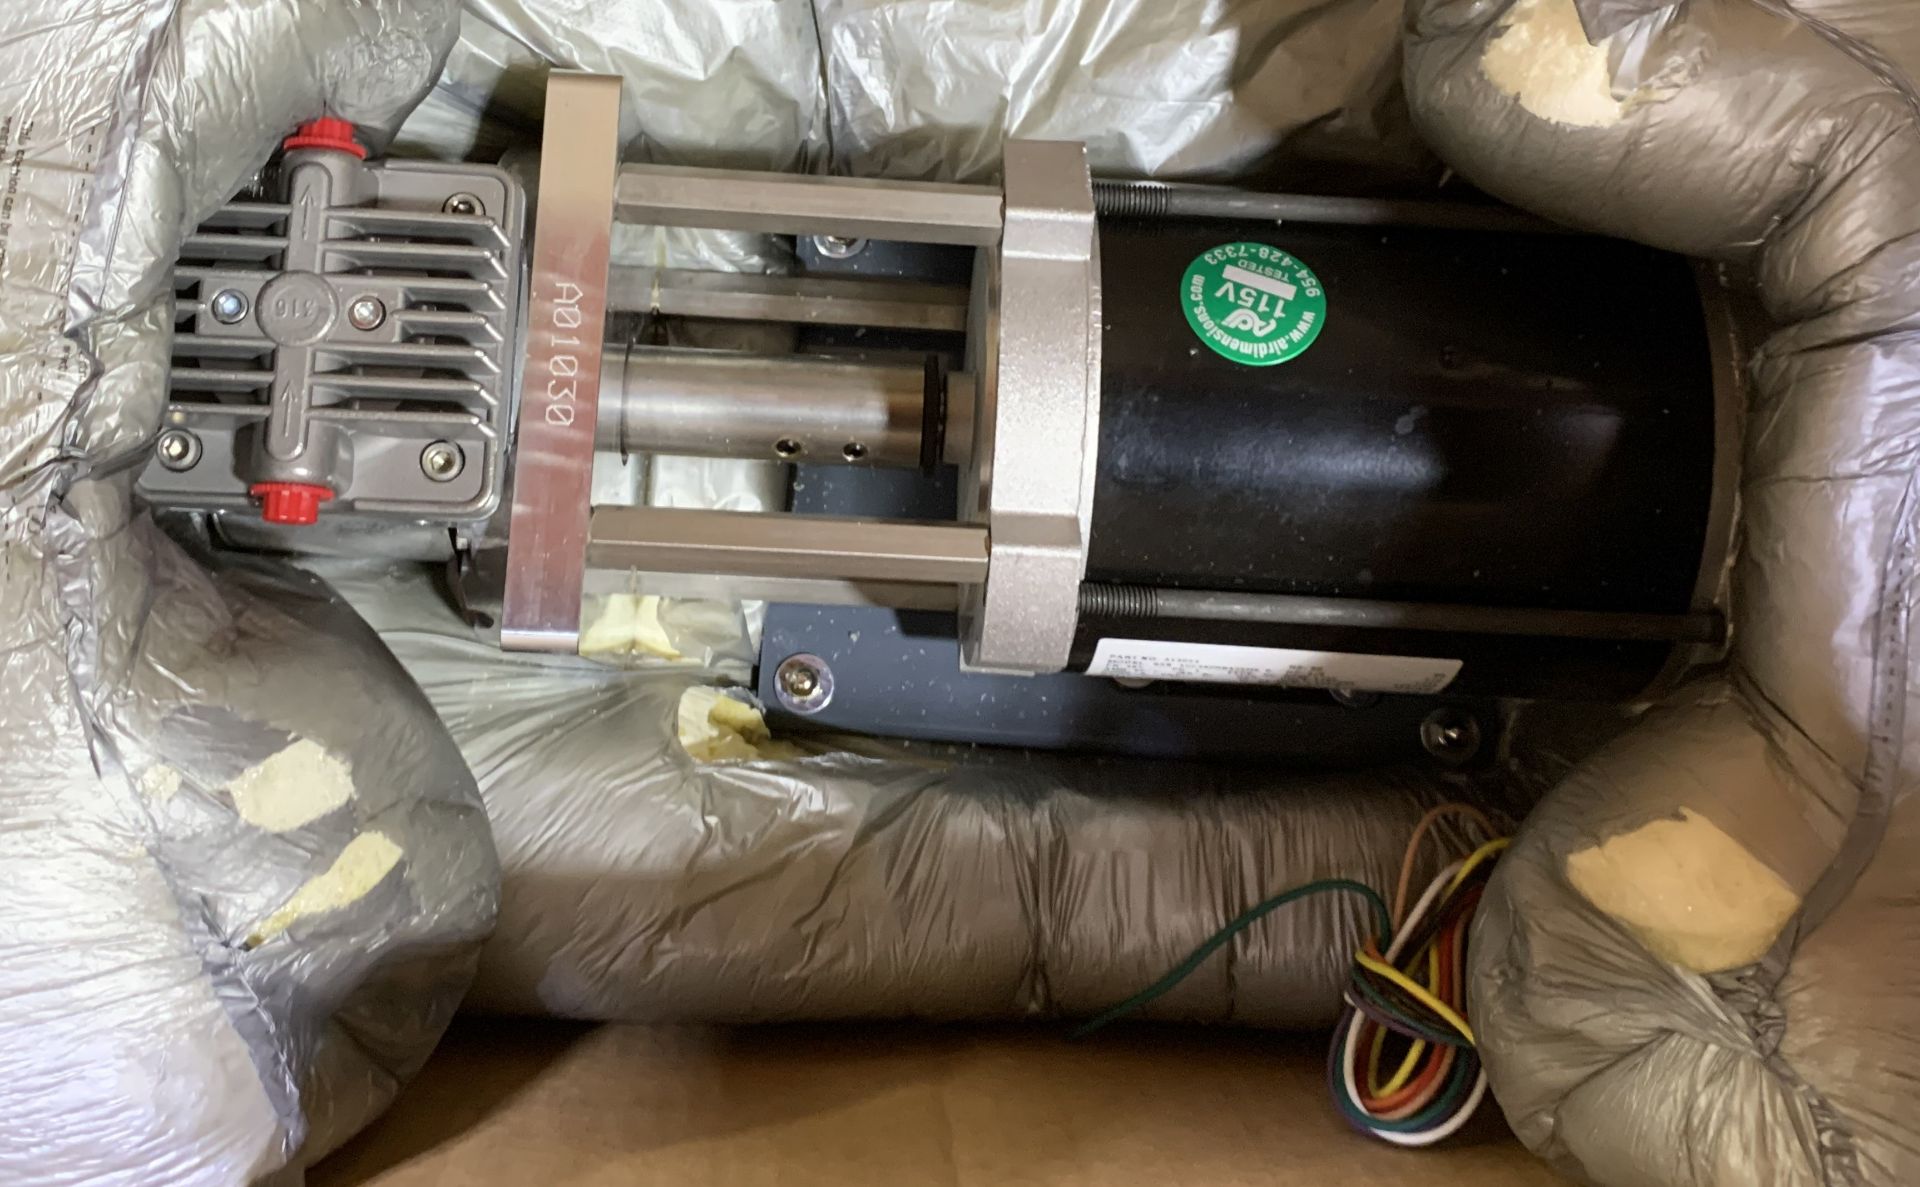 LOT/ CANADA 4X6 SFN PUMP, ANALYZER SAMPLE PUMP, SUBMERSIBLE PUMP CORES, 14" MOTOR STAND & DUCHTING - Image 20 of 23